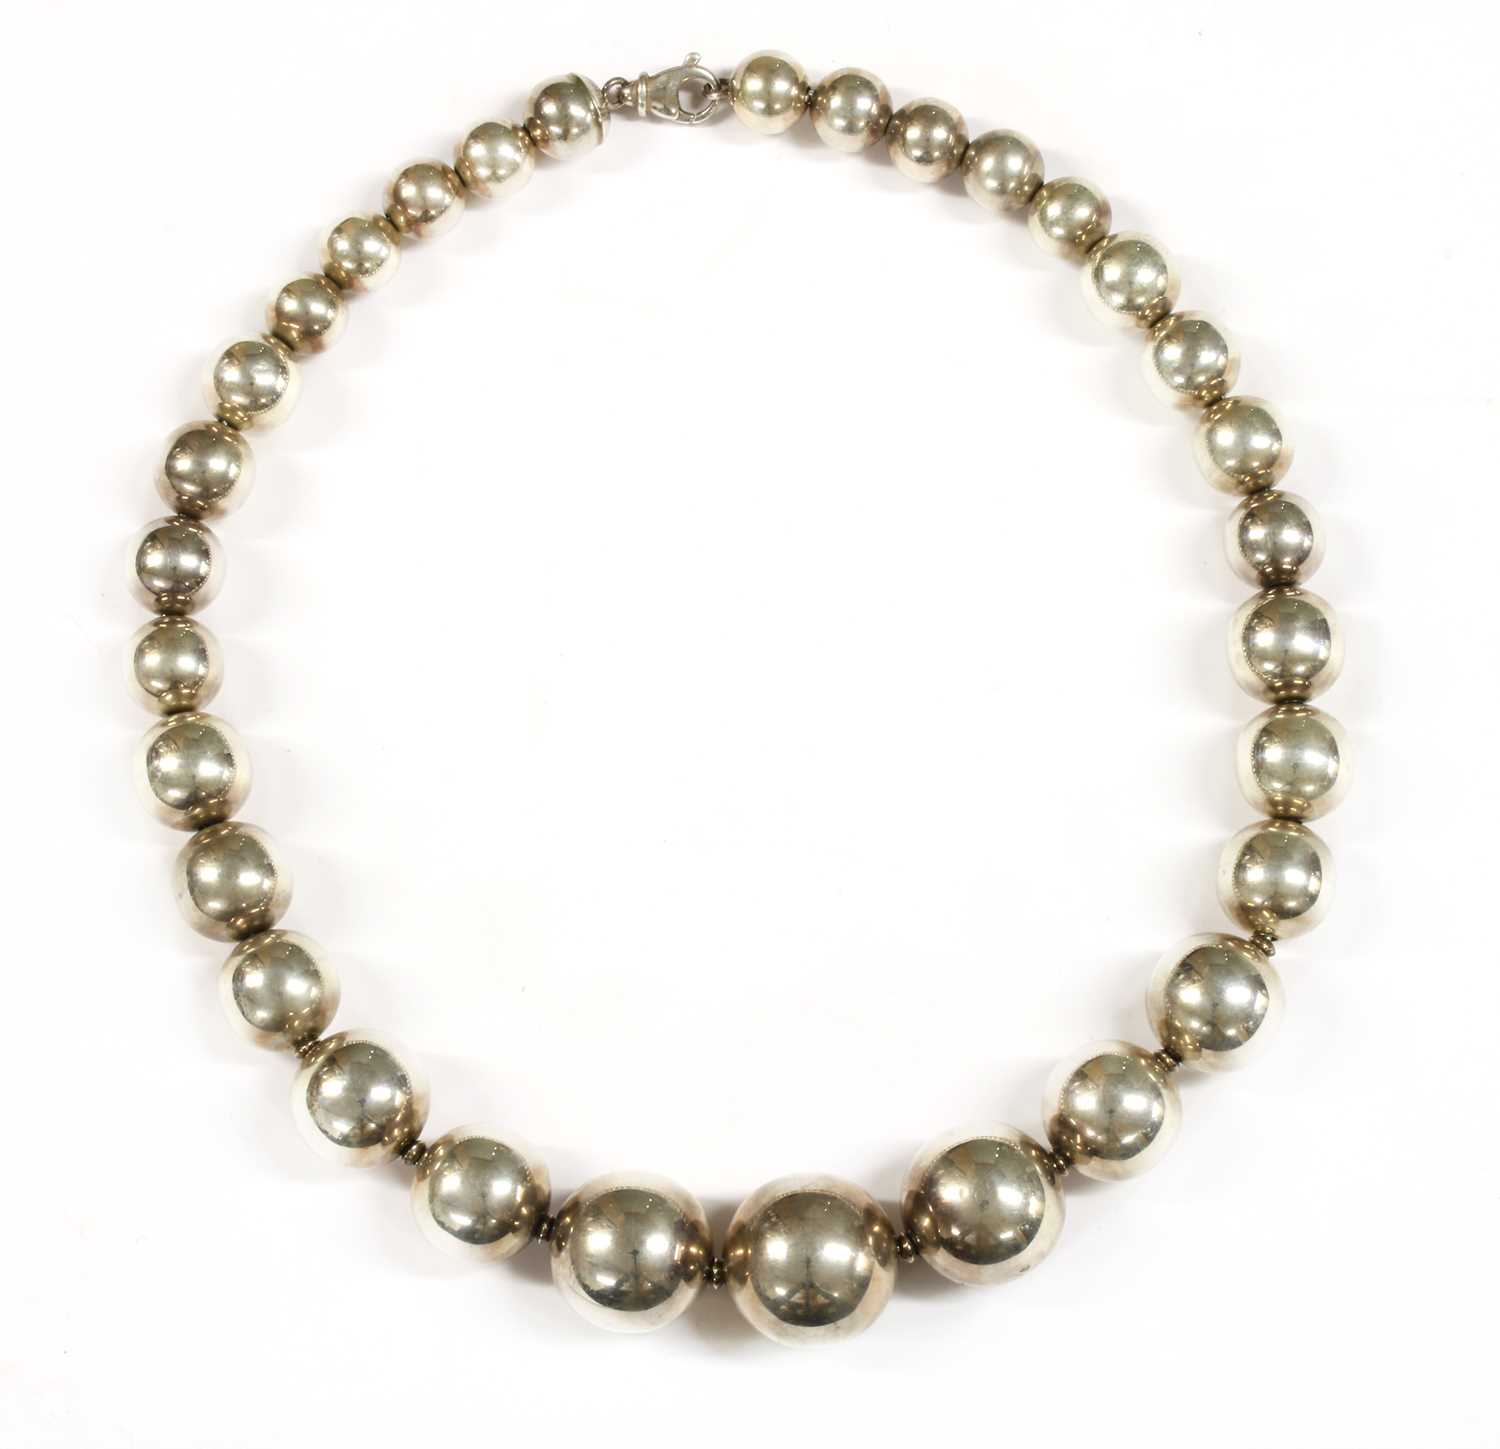 Lot 81 - An Italian sterling silver single row graduated bead necklace, by Old Florence